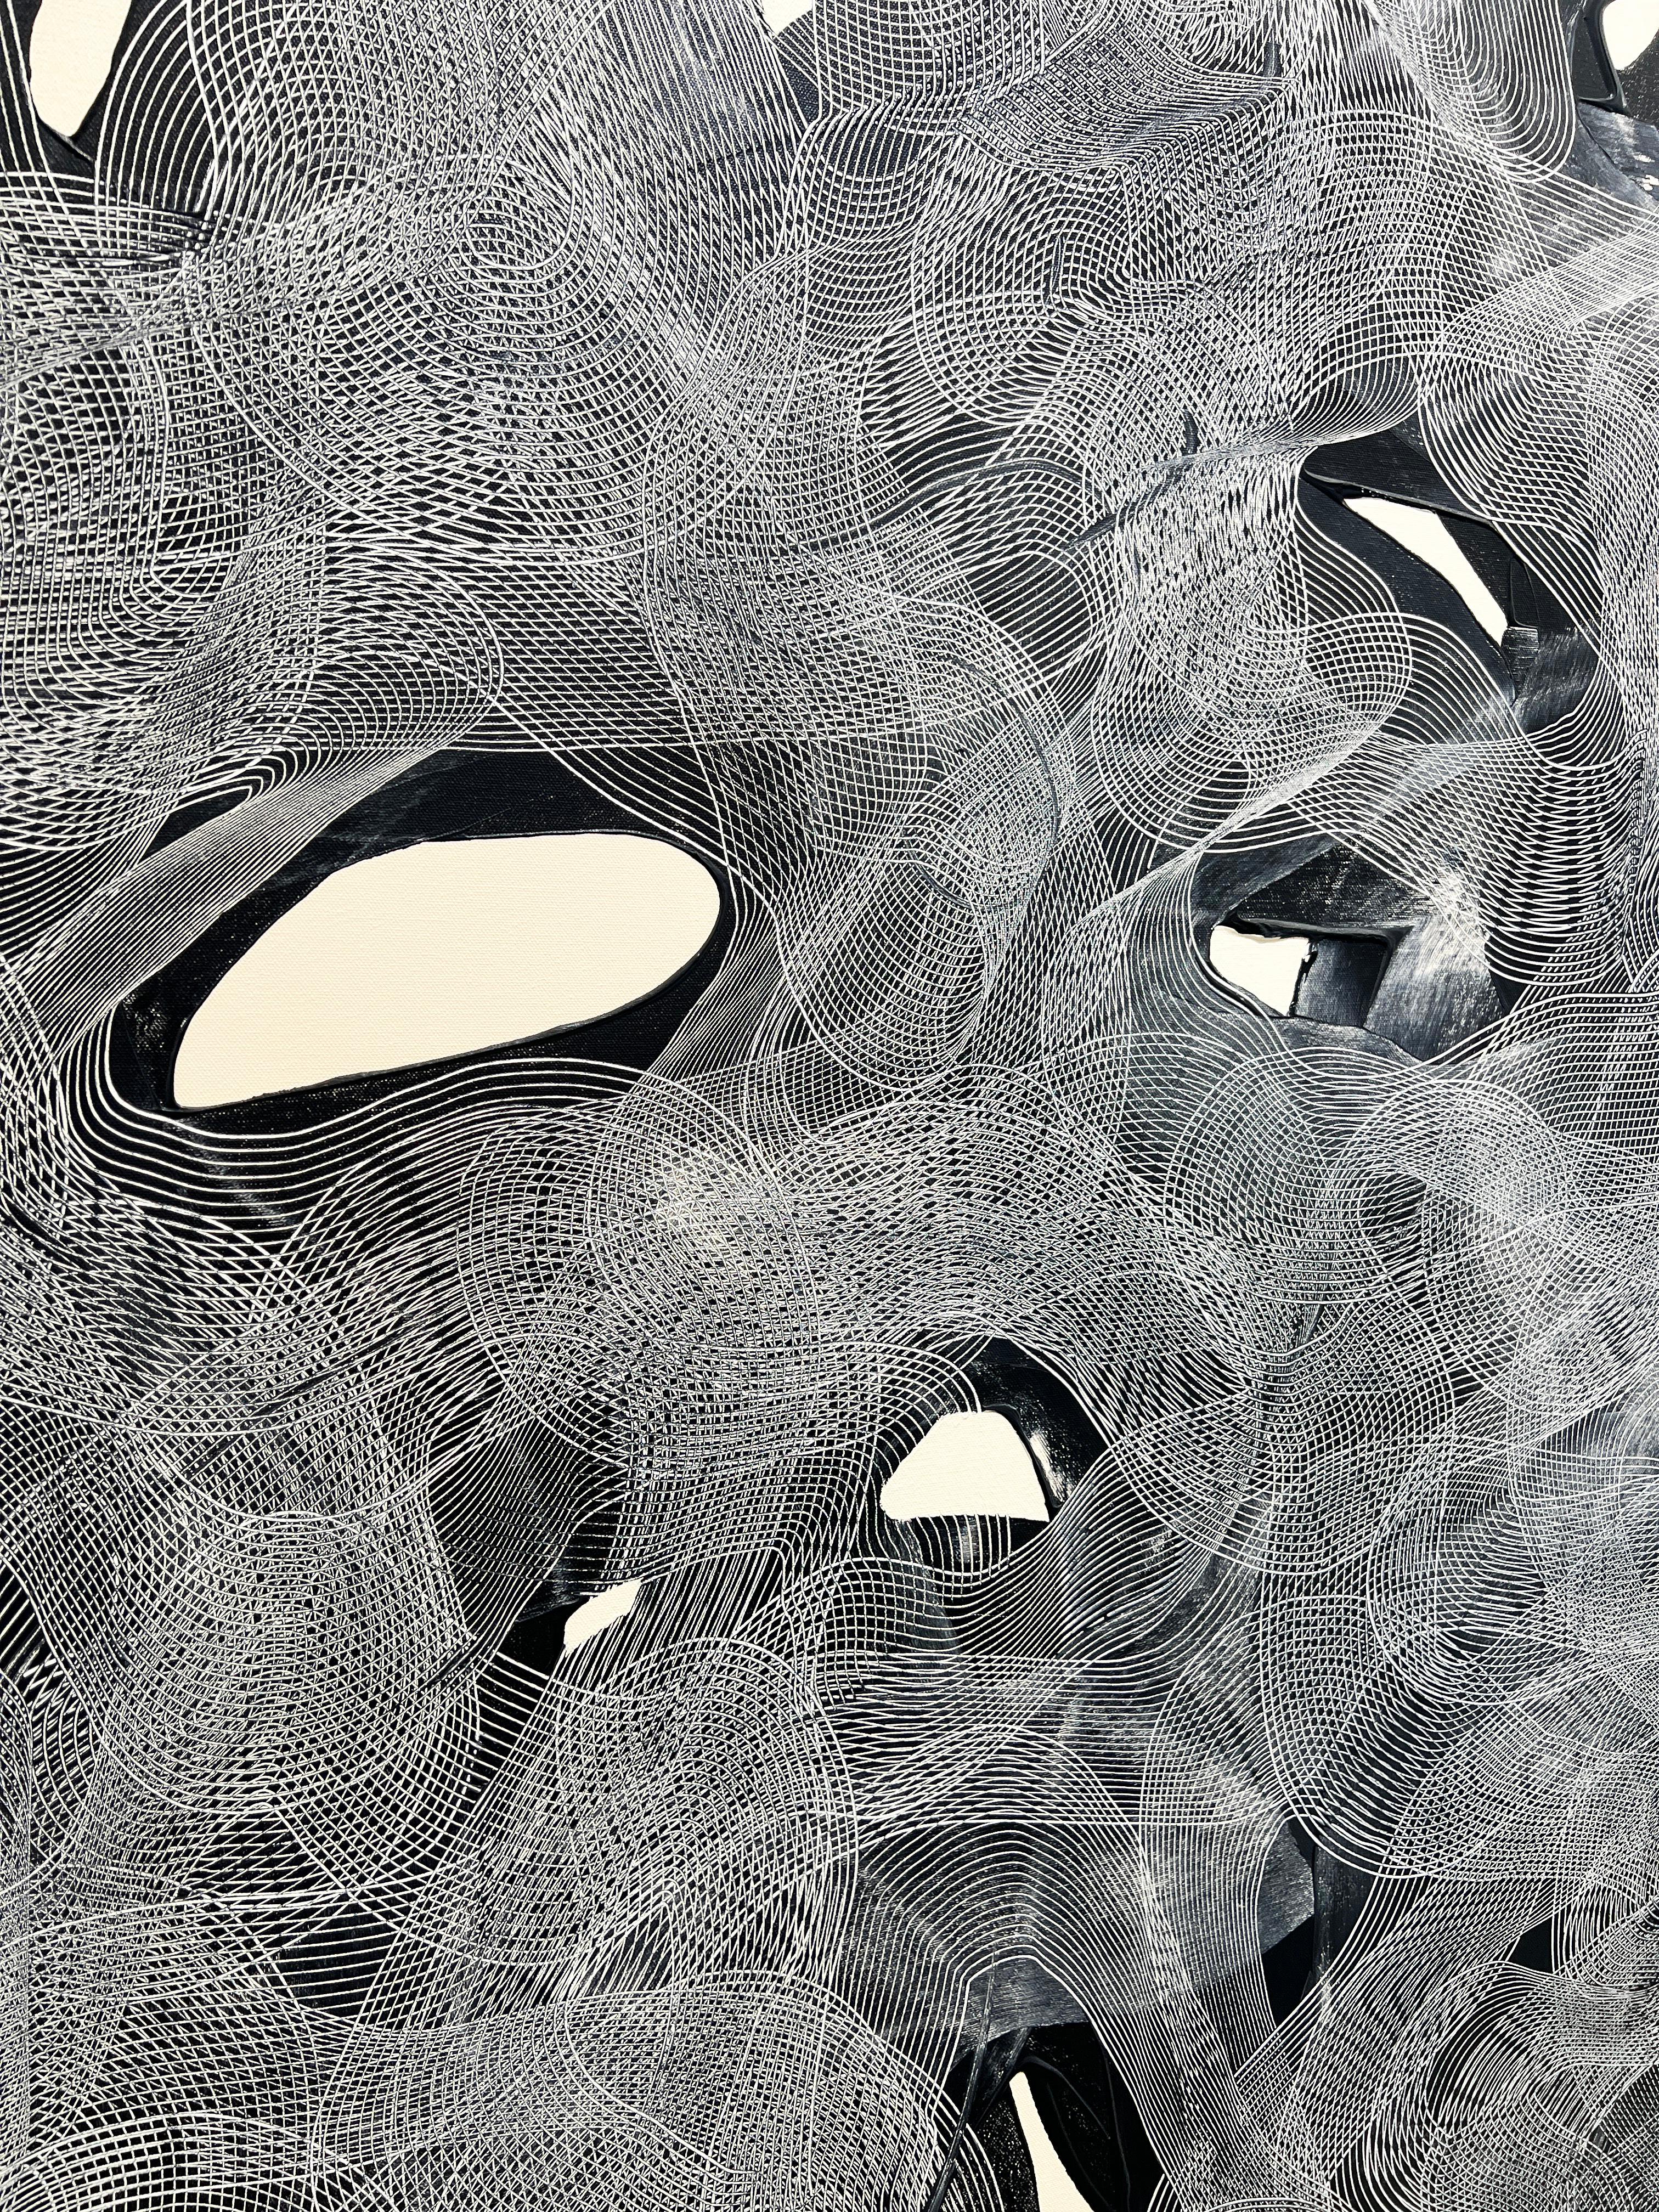 Ted Collier mimics the movement of snakeskin with a focus on black and white linear abstraction.